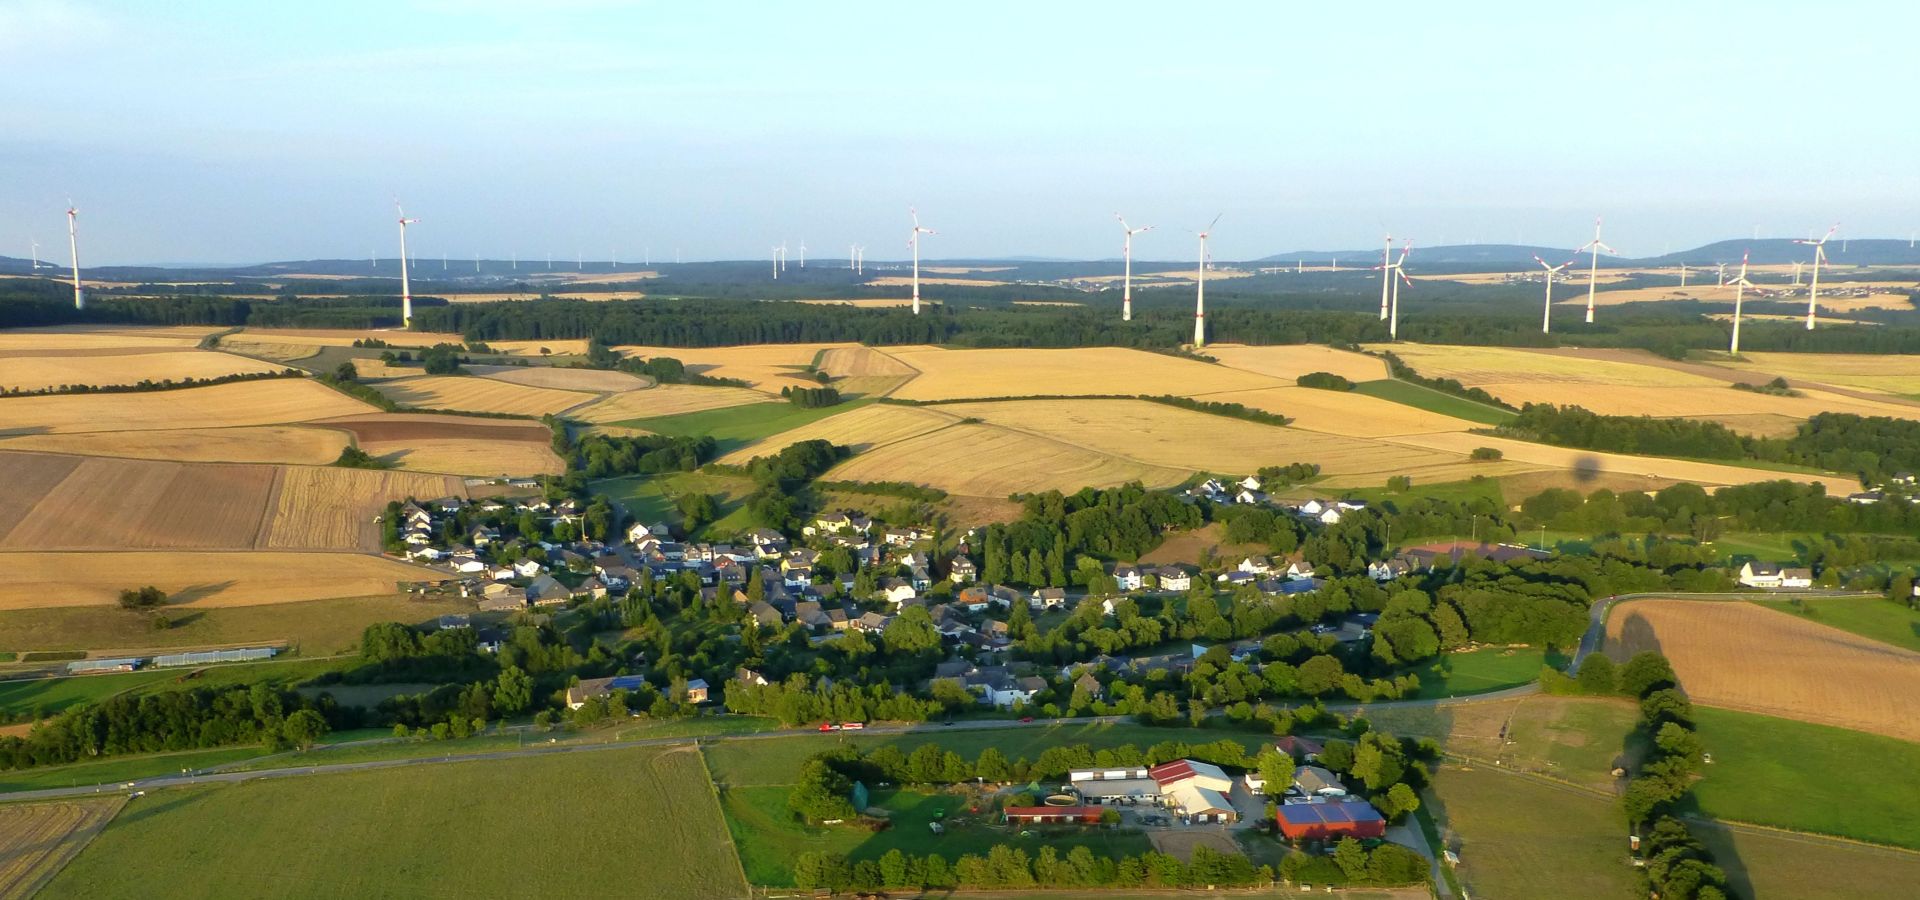 the village of Neuerkirch seen from above, surrounded by fields and wind turbines